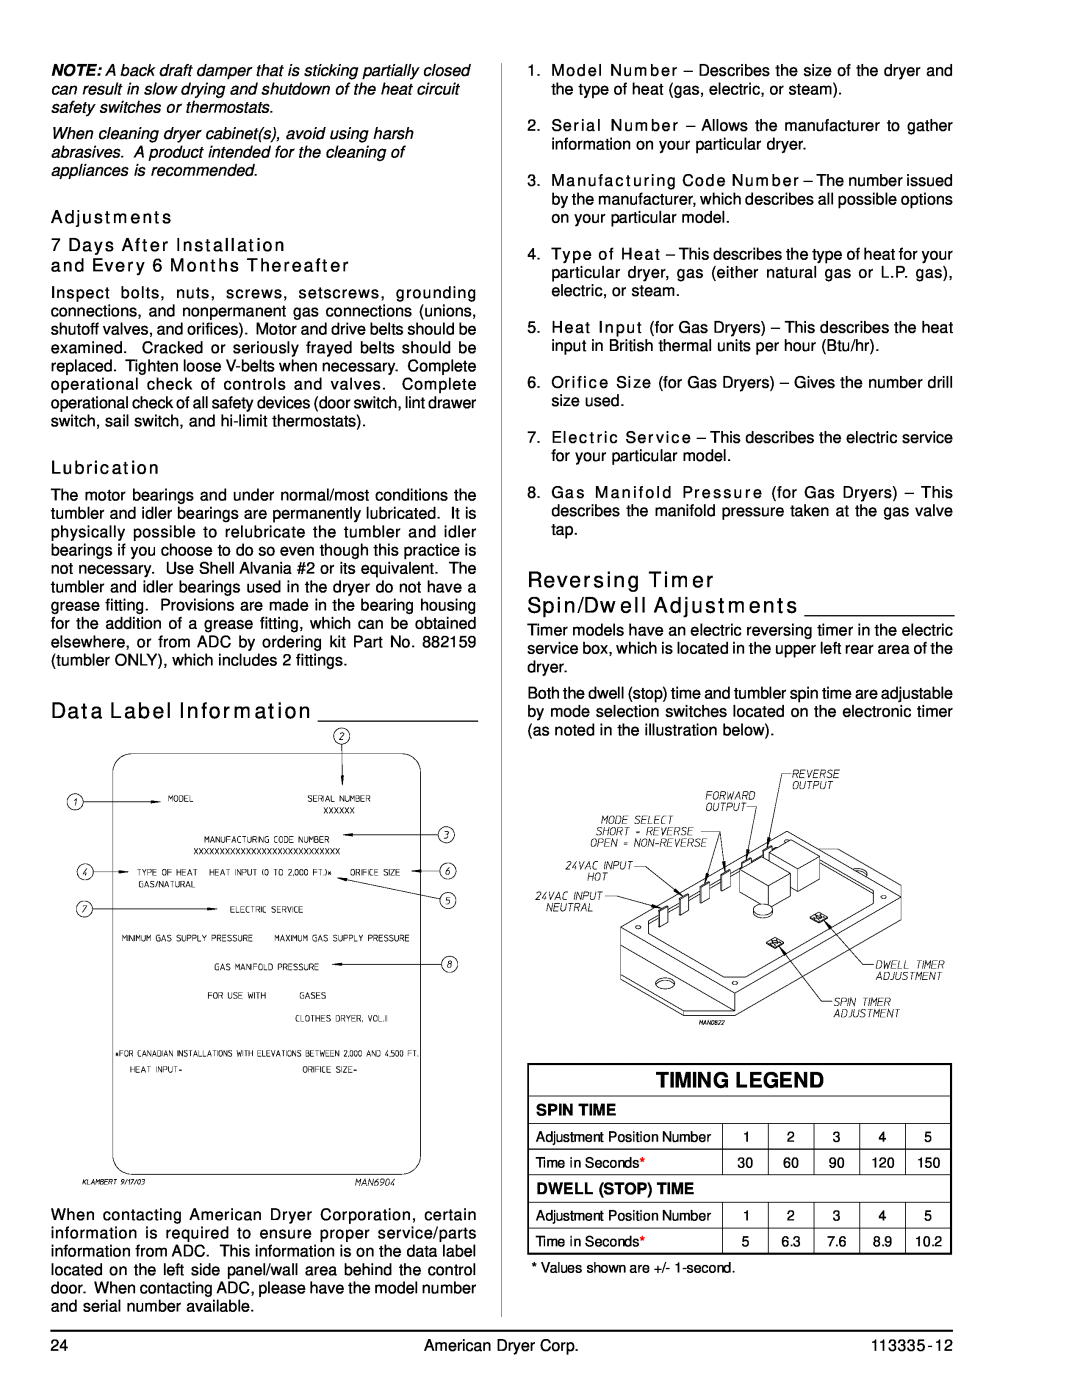 American Dryer Corp ML-130 III Data Label Information, Reversing Timer Spin/Dwell Adjustments, Timing Legend, Lubrication 